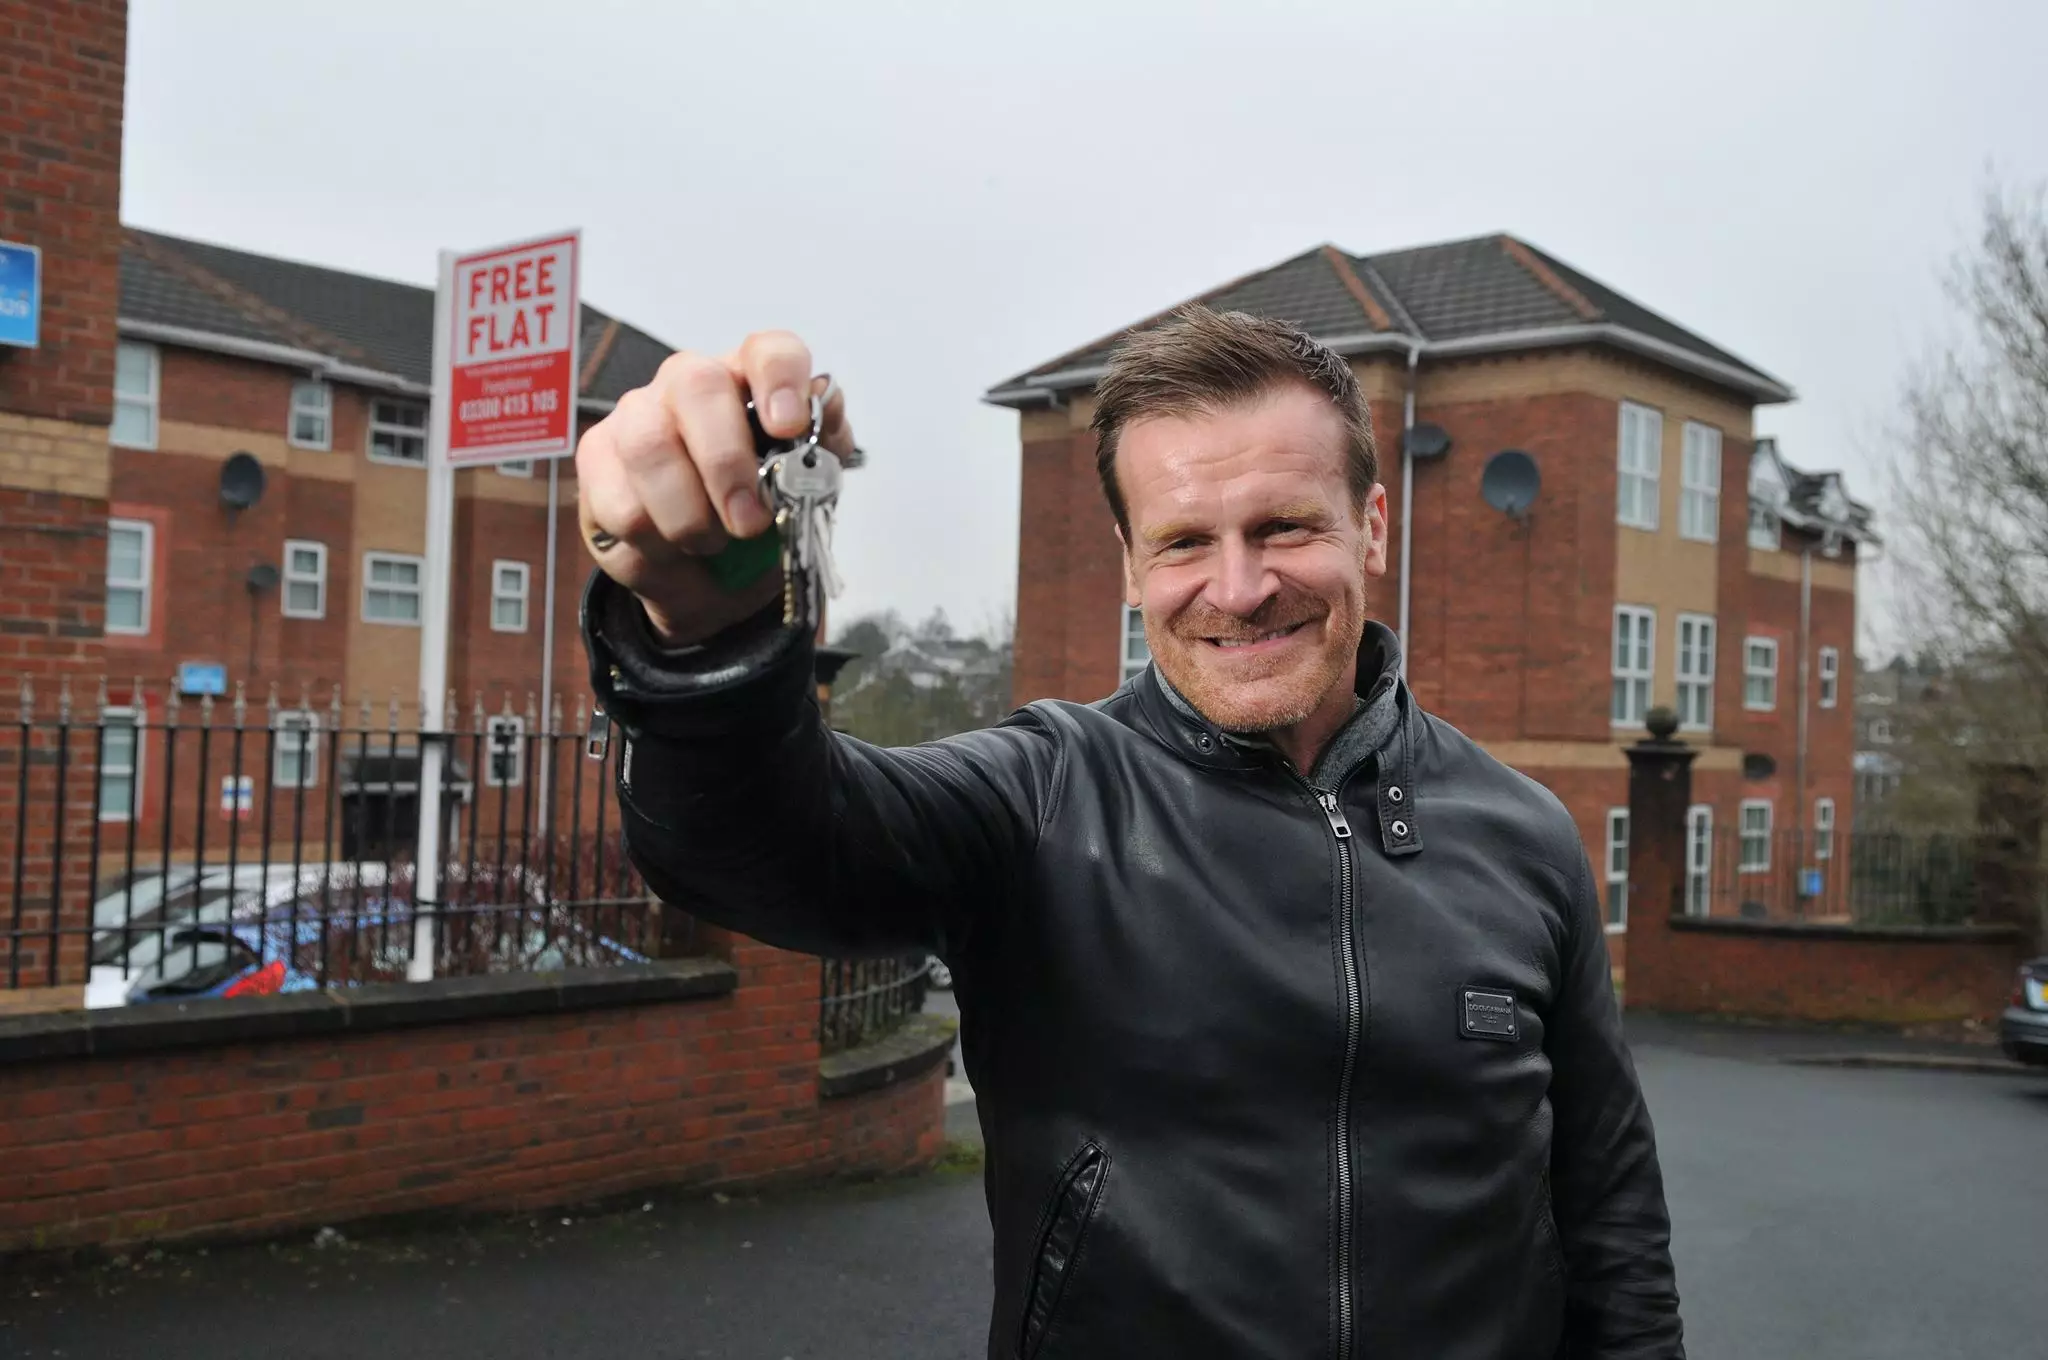 Generous Millionaire Giving Away £120k Three-Bedroom Apartment For Free